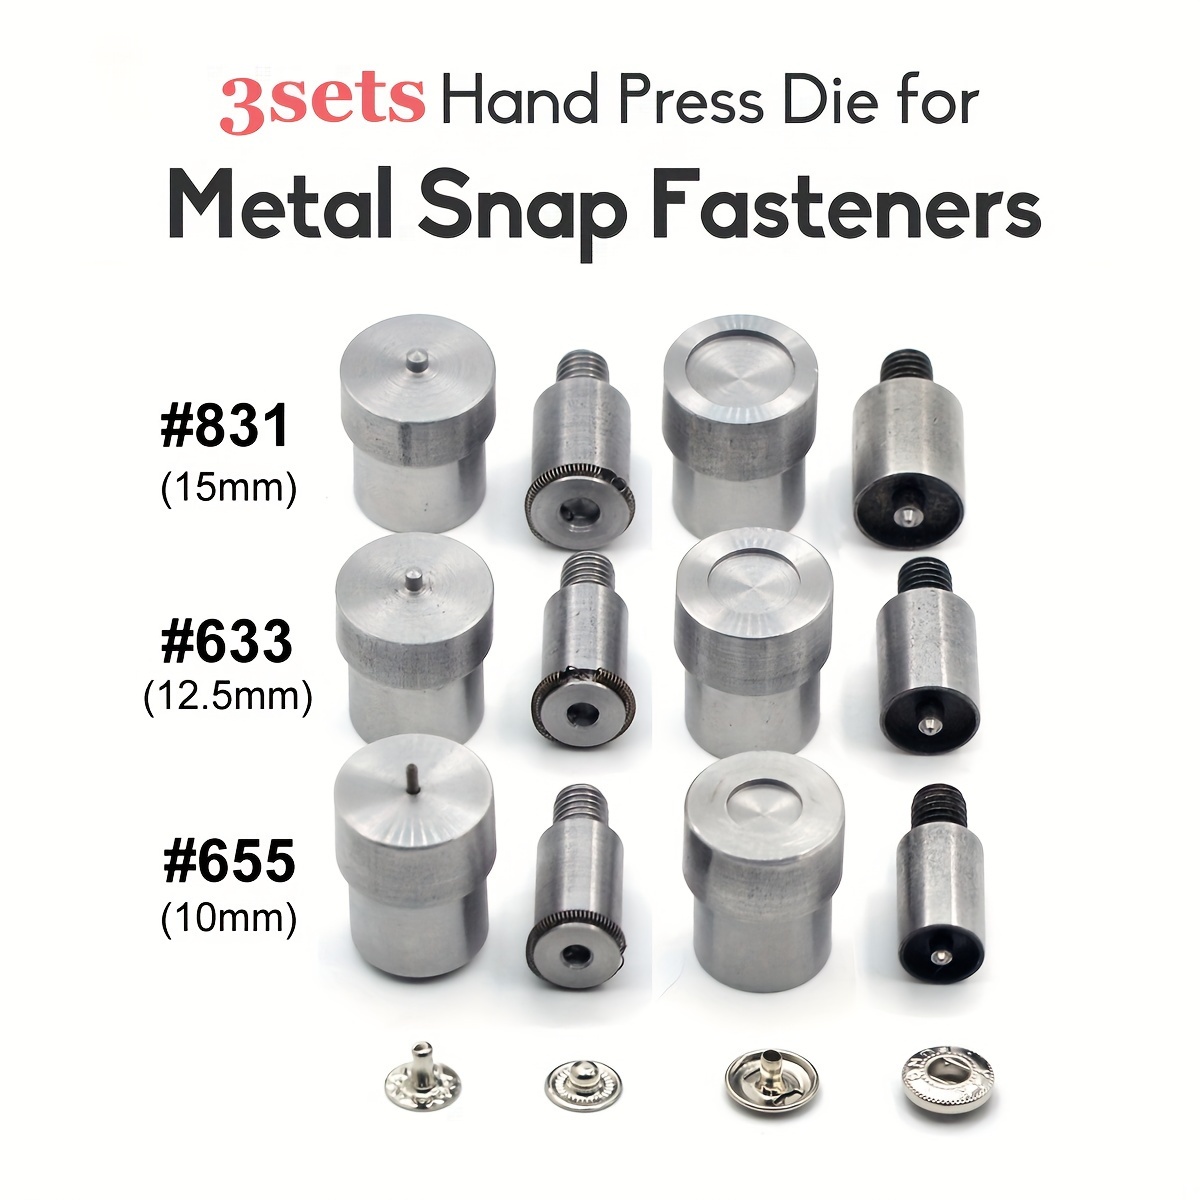 

3-piece, 4-piece Silvery Stainless Steel Snap Fastener Sets With Durable Dies And Templates For Easy Installation - Compatible With 651/633/831 Buttons